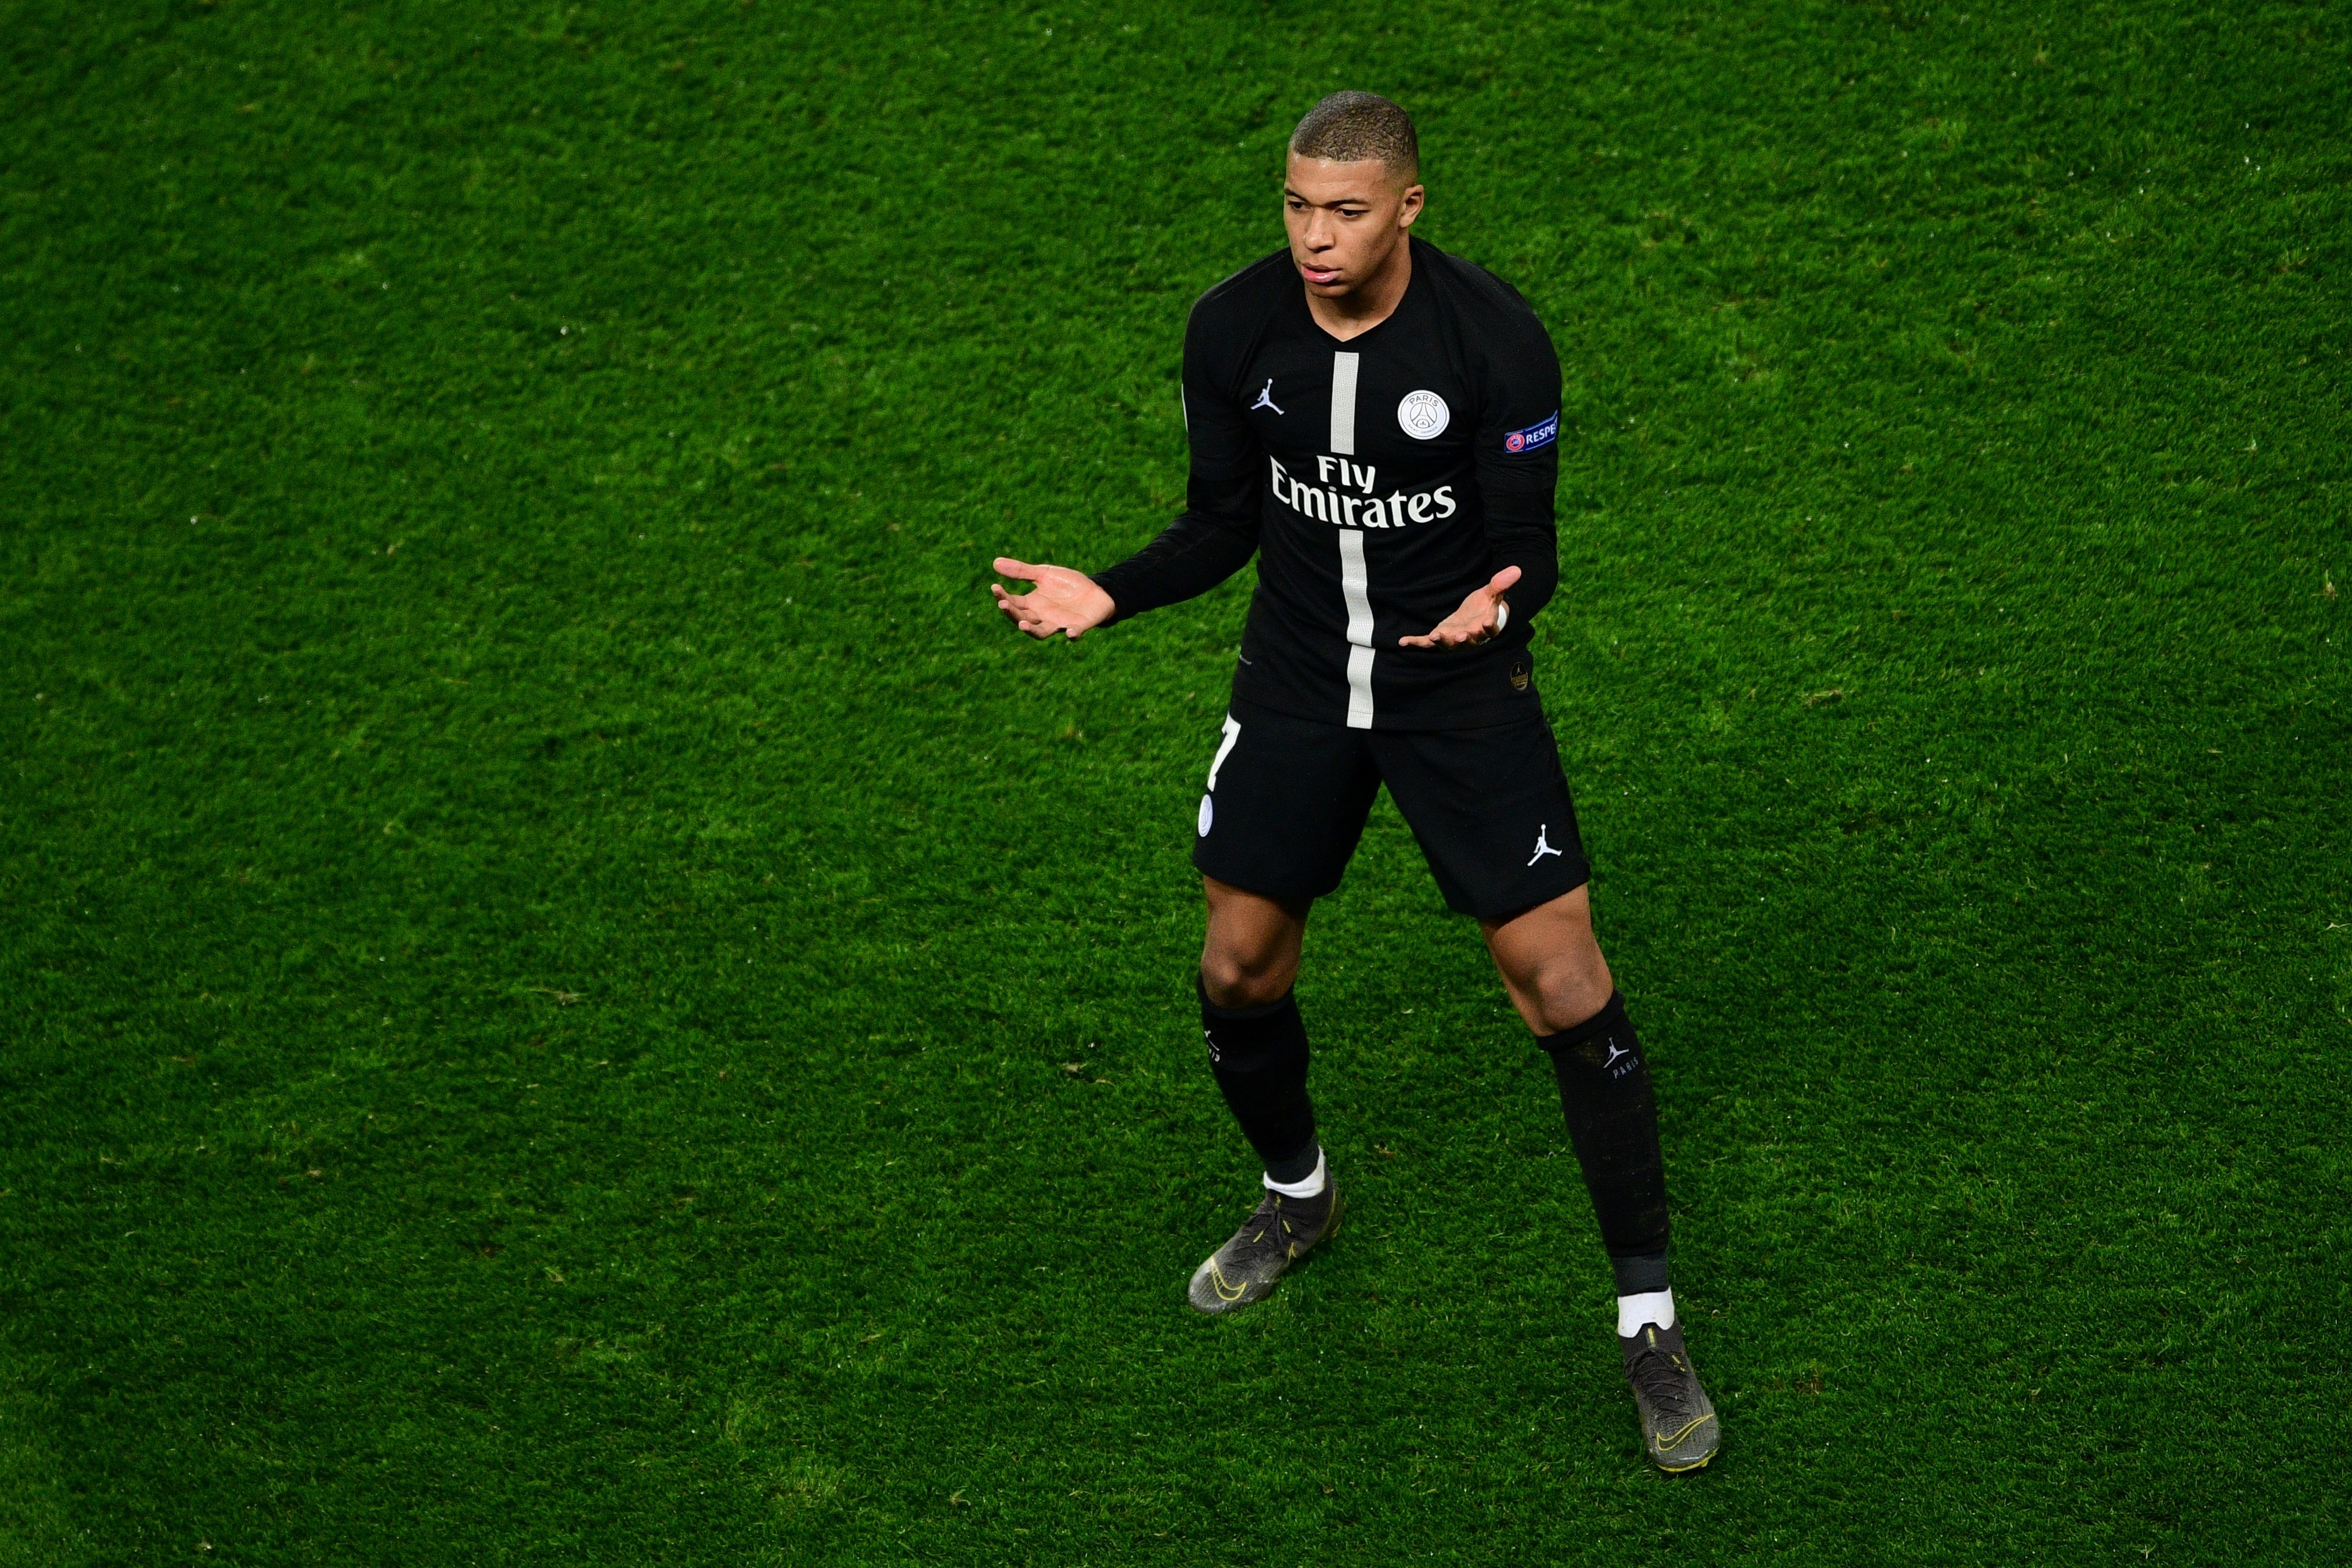 Real Madrid have been eyeing Mbappe for years now (Photo by Martin Bureau/AFP/Getty Images)